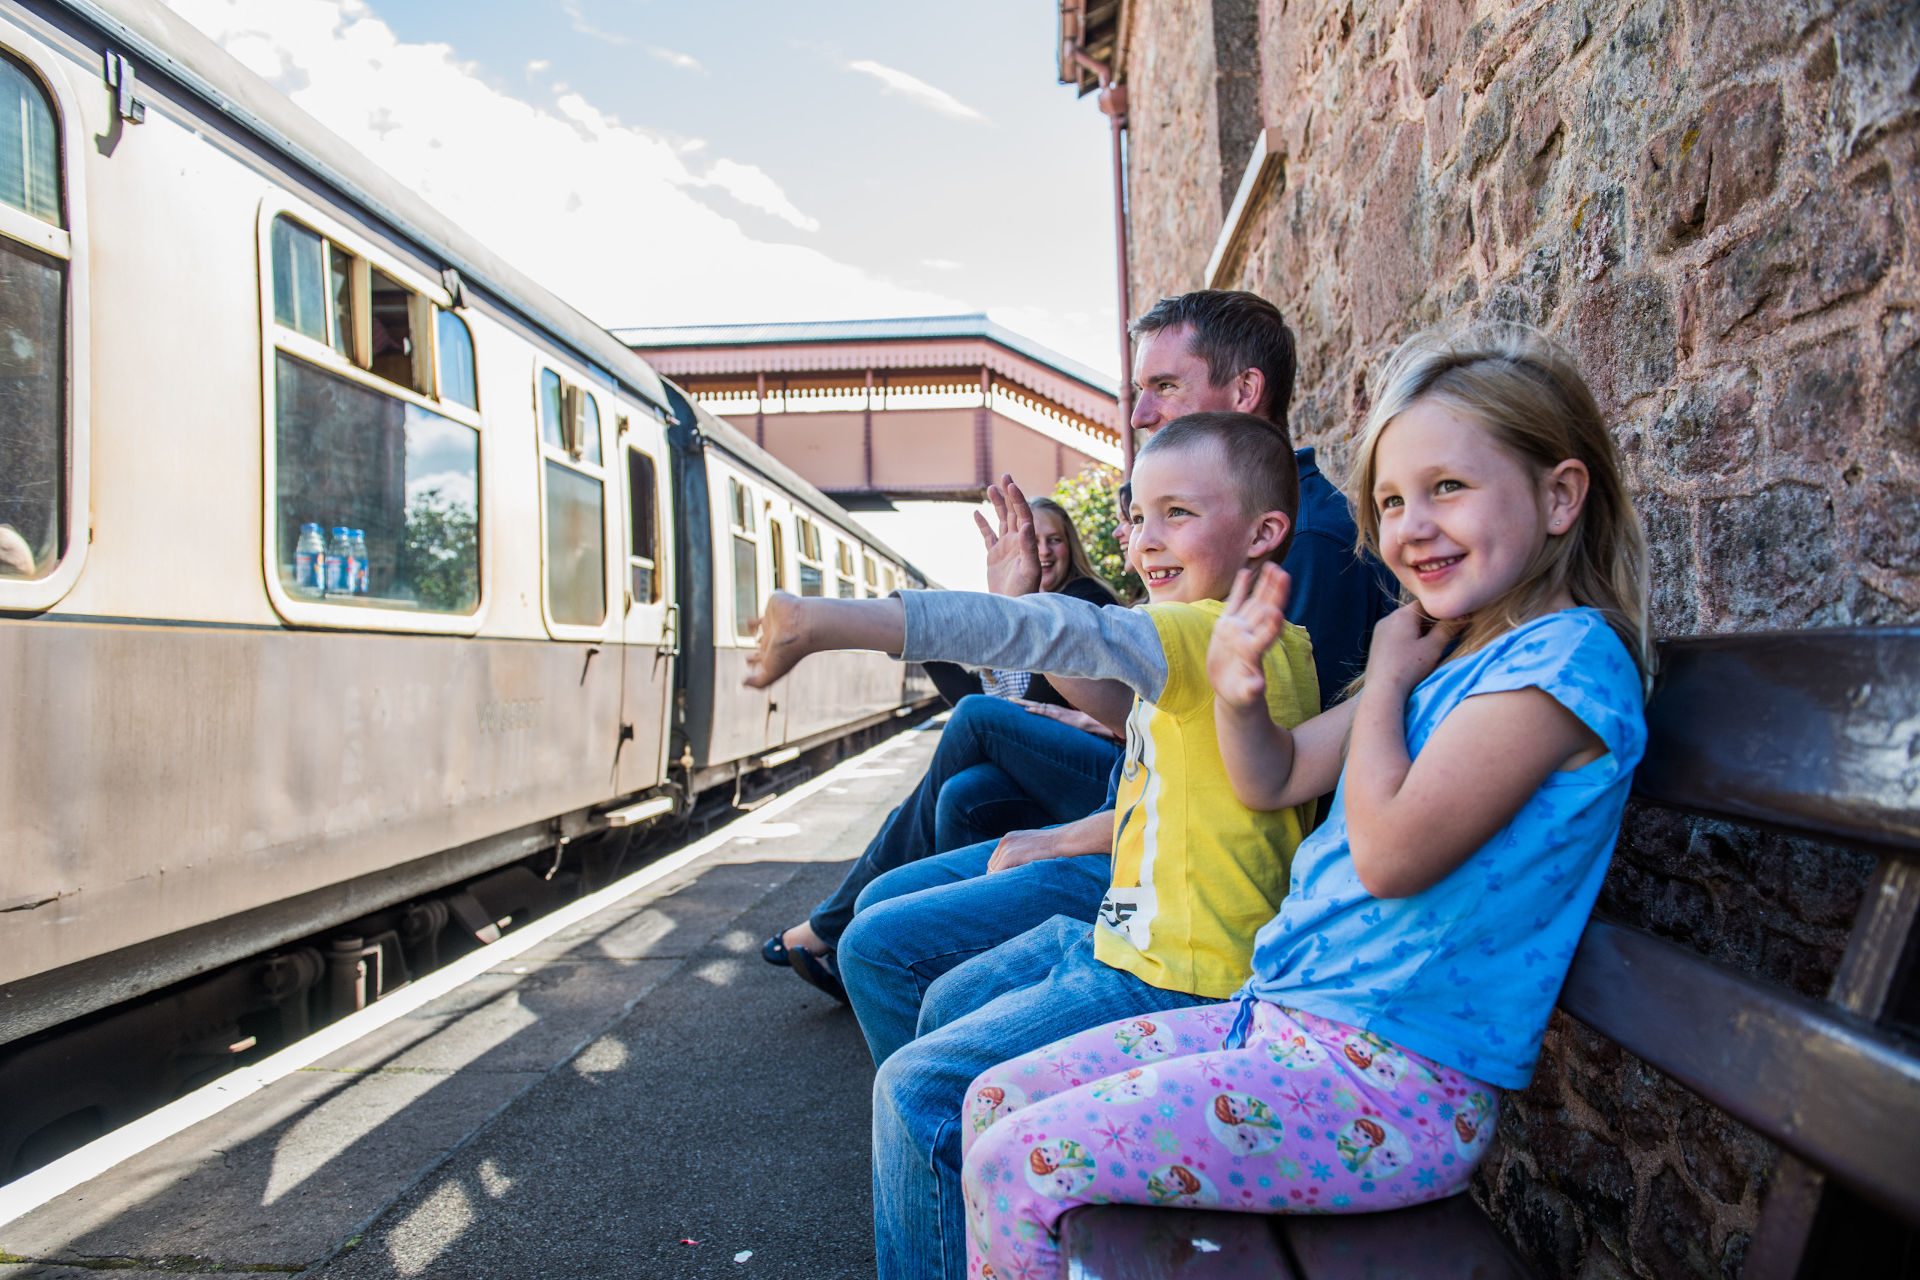 A young family sit on a bench on a platform and wave at a train